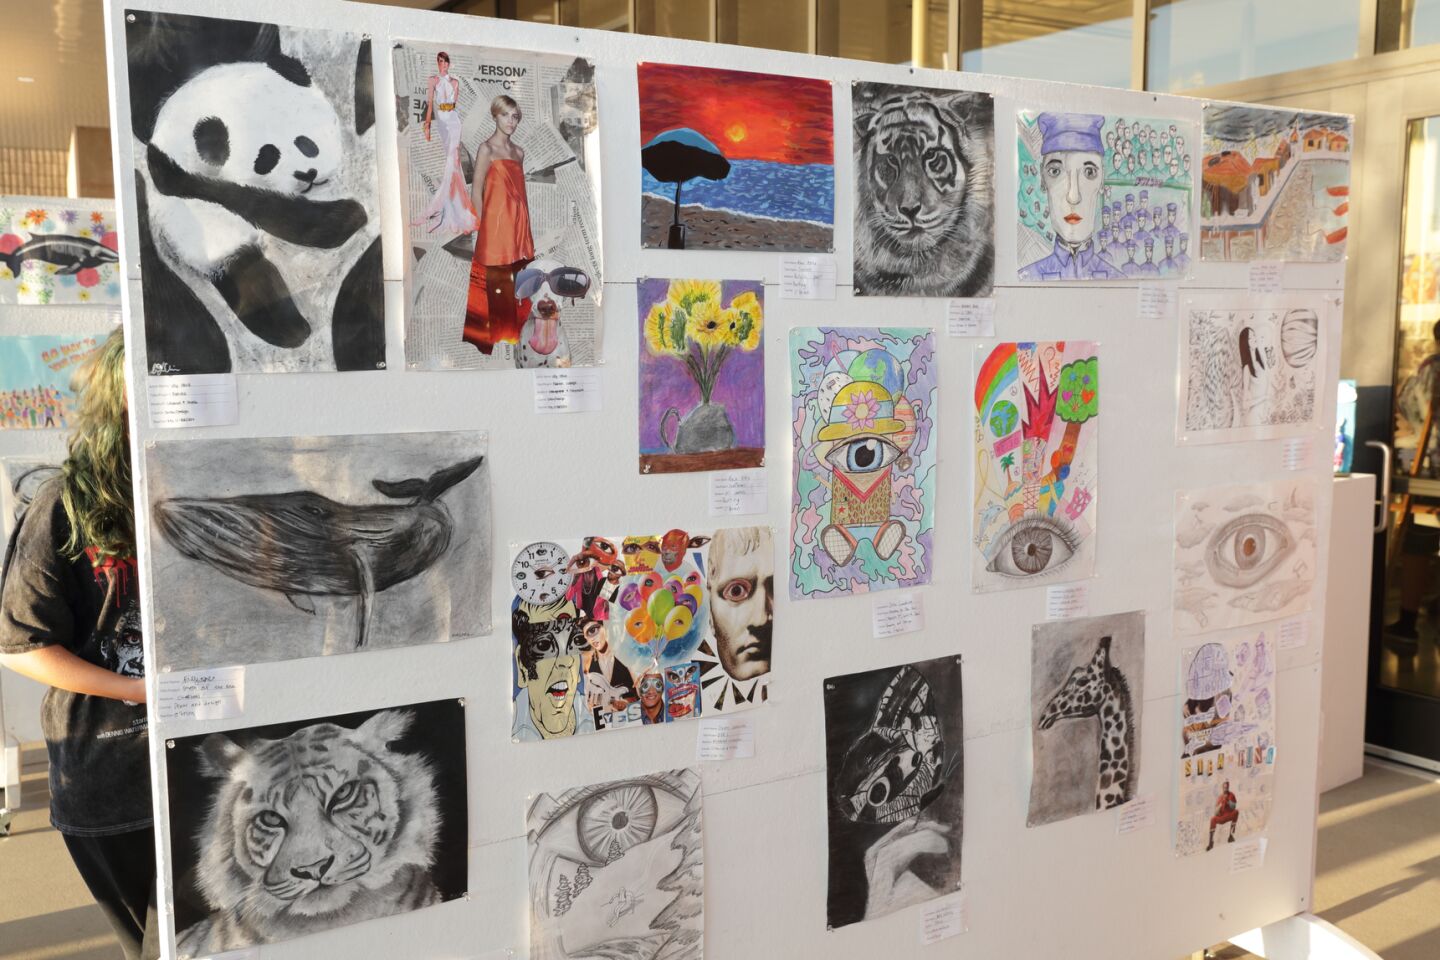 Student projects from the Drawing and Design class